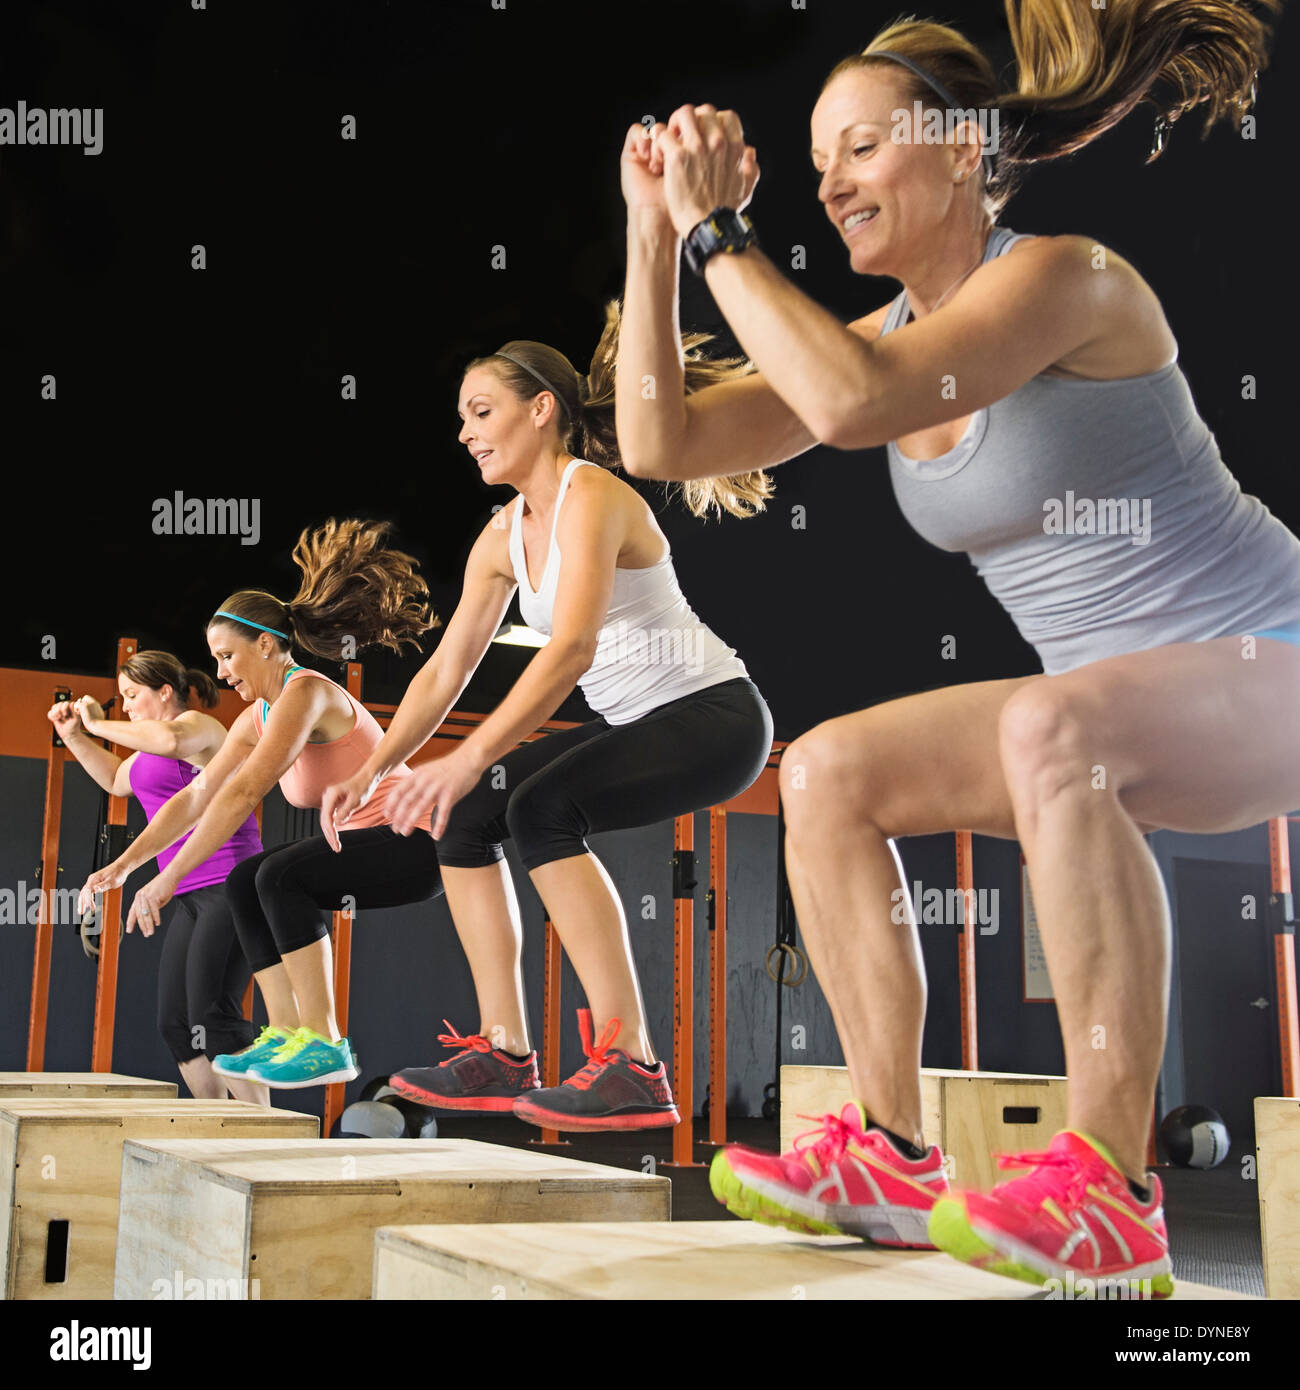 Women training together in gym Stock Photo